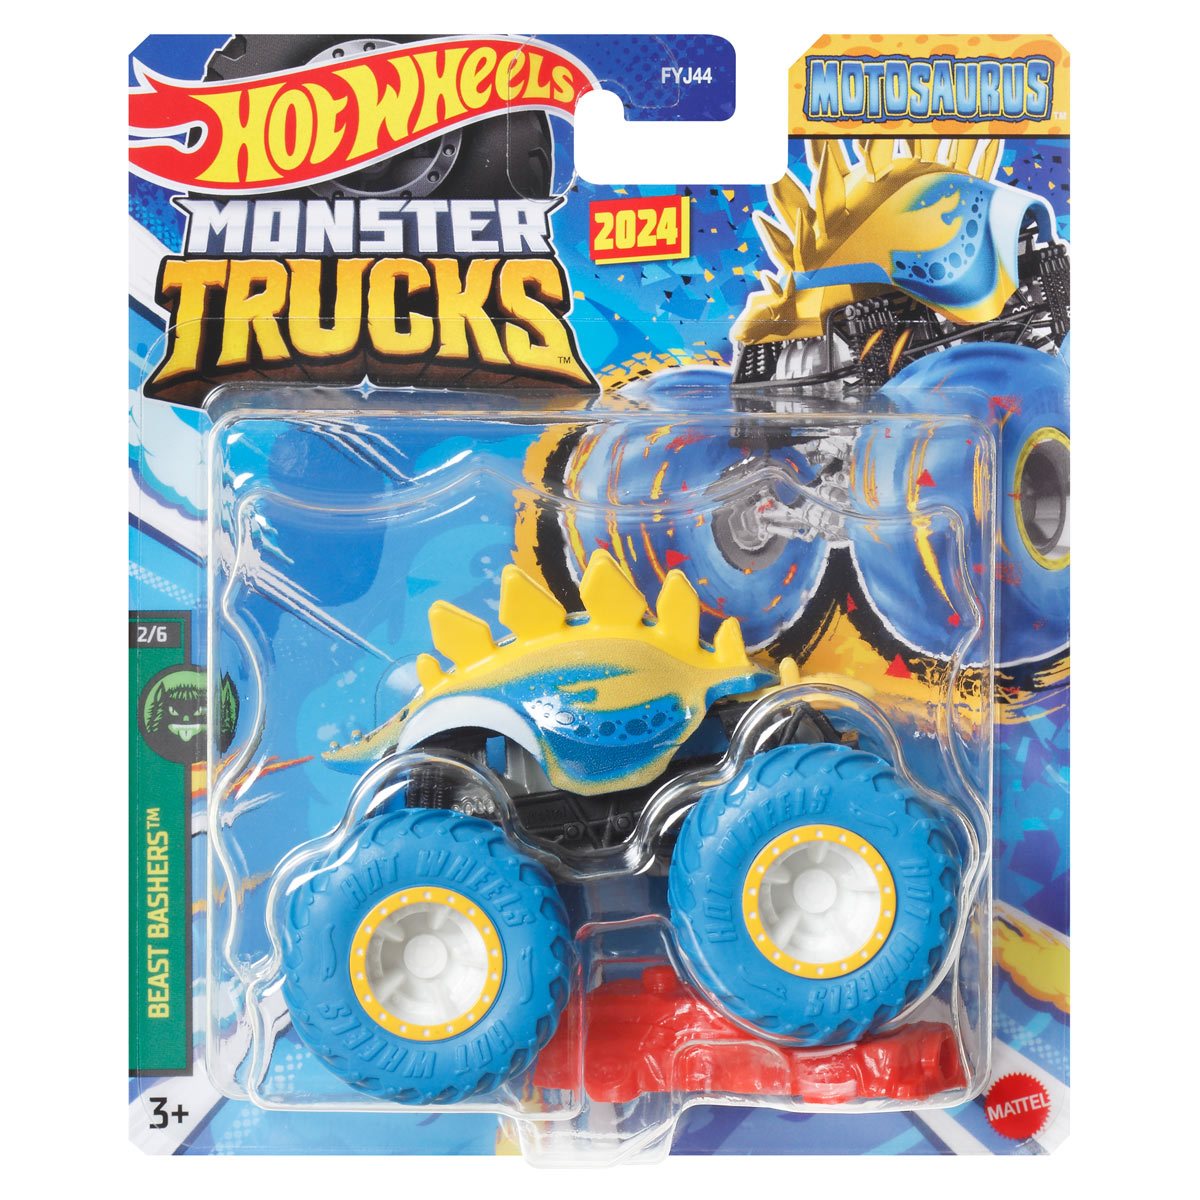 Hot Wheels Monster Trucks 1:64 Scale Mix 6 (F) Case of 8 Vehicles